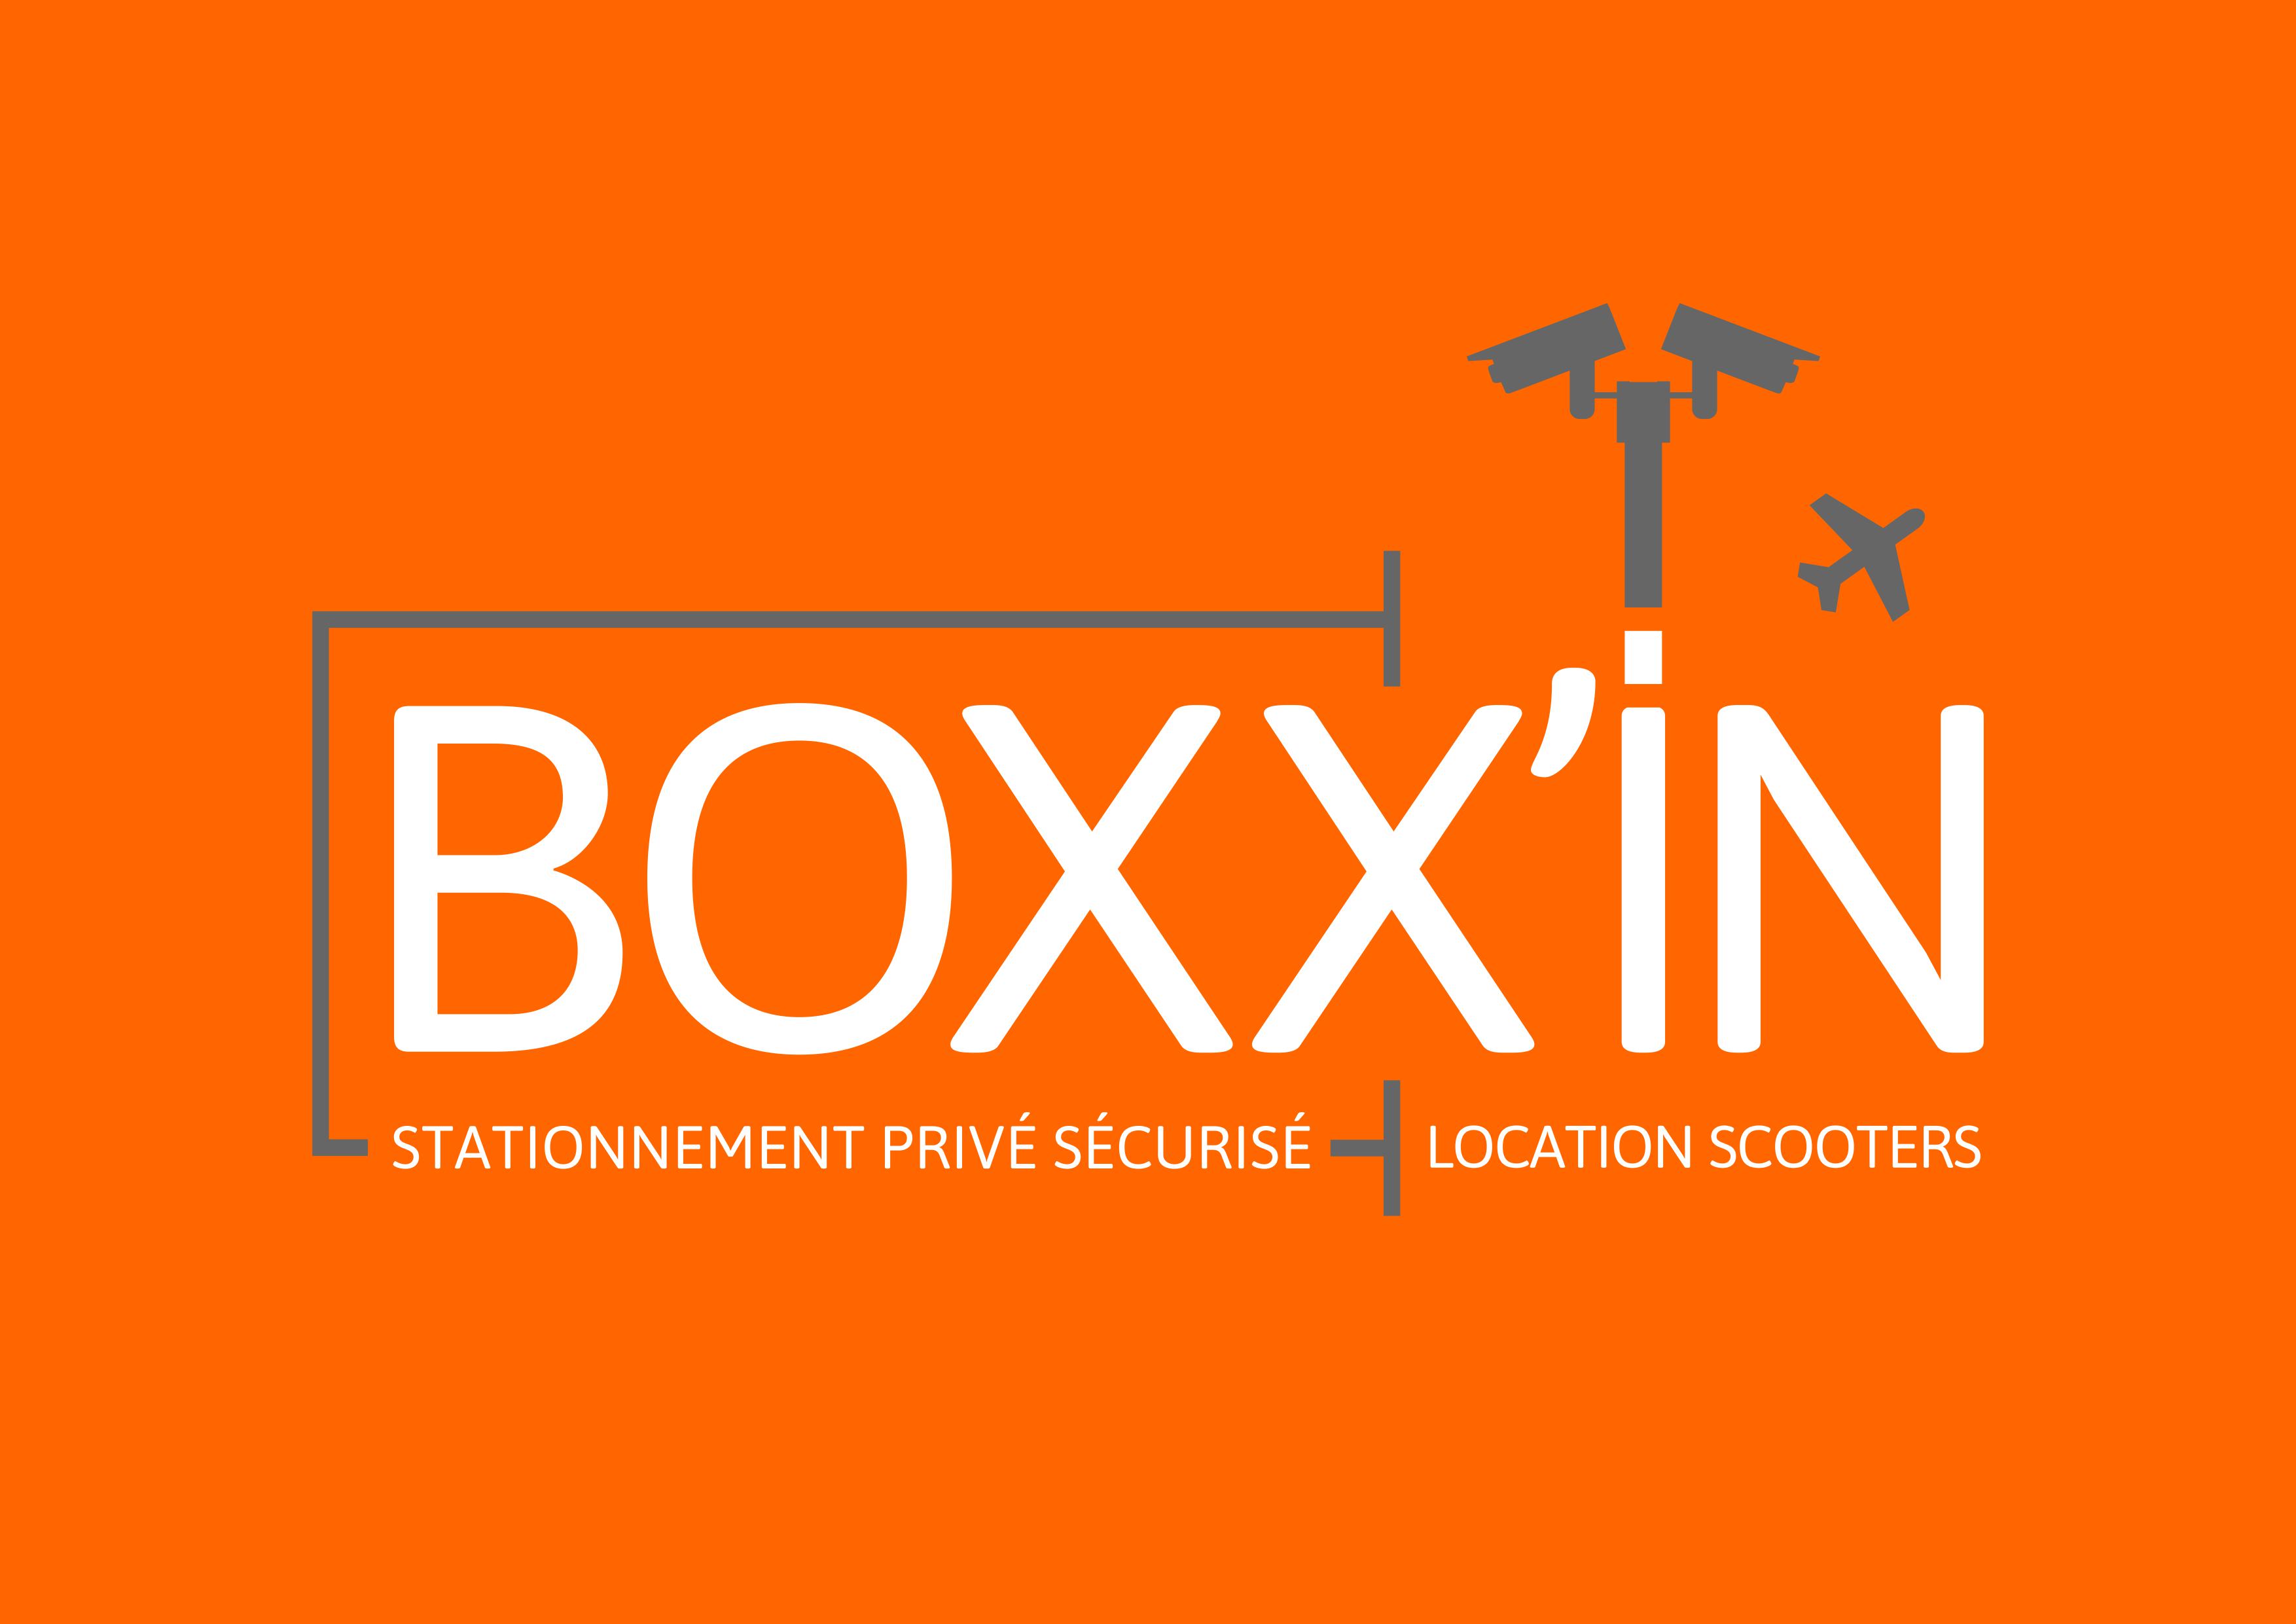 Boxxin parking